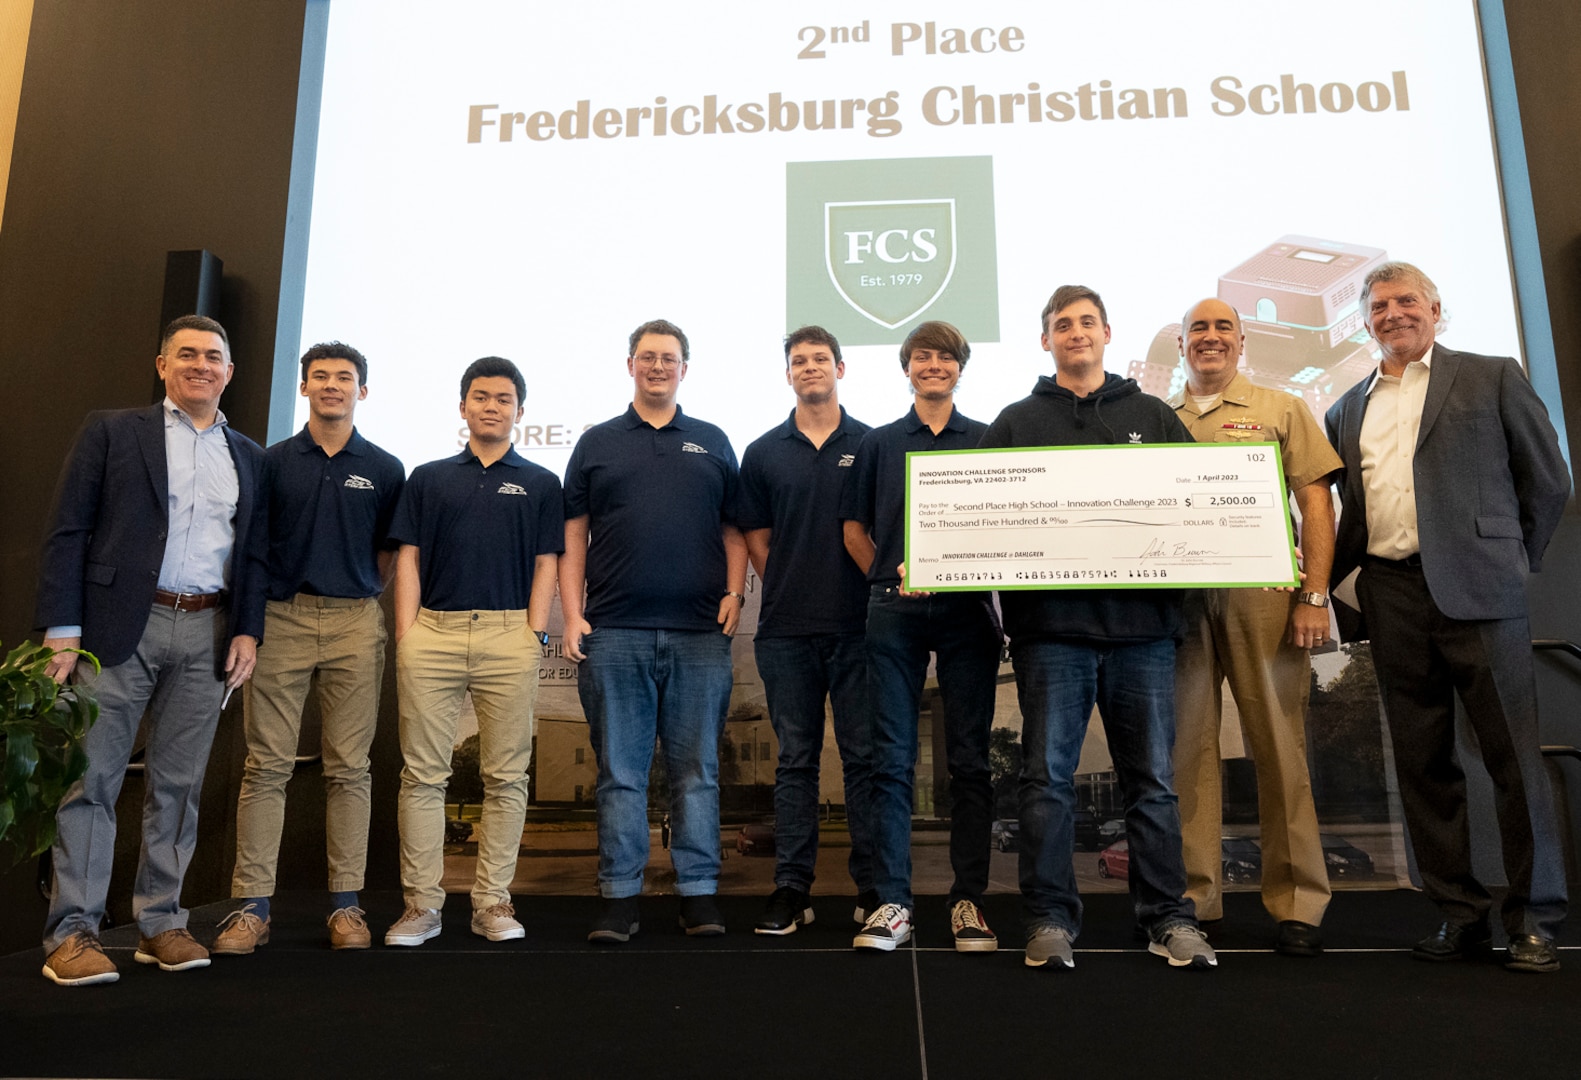 IMAGE: Naval Surface Warfare Center Dahlgren Division’s Technical Director Dale Sisson Jr., SES, and Commanding Officer Capt. Philip Mlynarski along with University of Mary Washington’s Dr. John Burrow (left) pose with the Fredericksburg Christian School (FCS) robotics team. The FCS team placed second in this year’s High School Innovation Challenge @ Dahlgren competition.